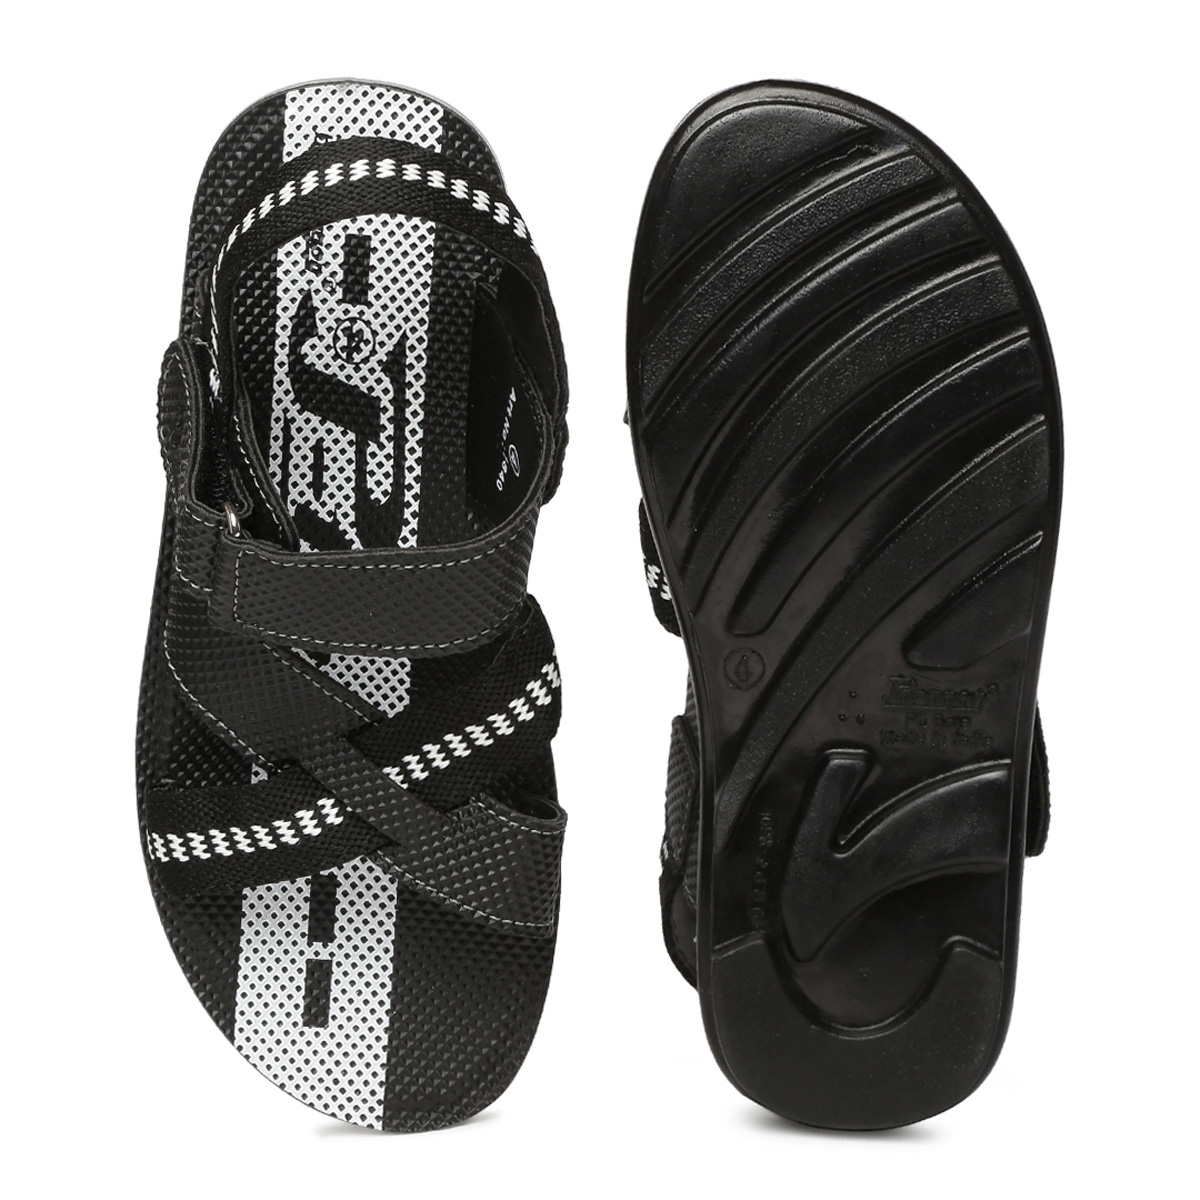 Buy Paragon-P-Toes Men's Black Slippers Online @ ₹269 from ShopClues